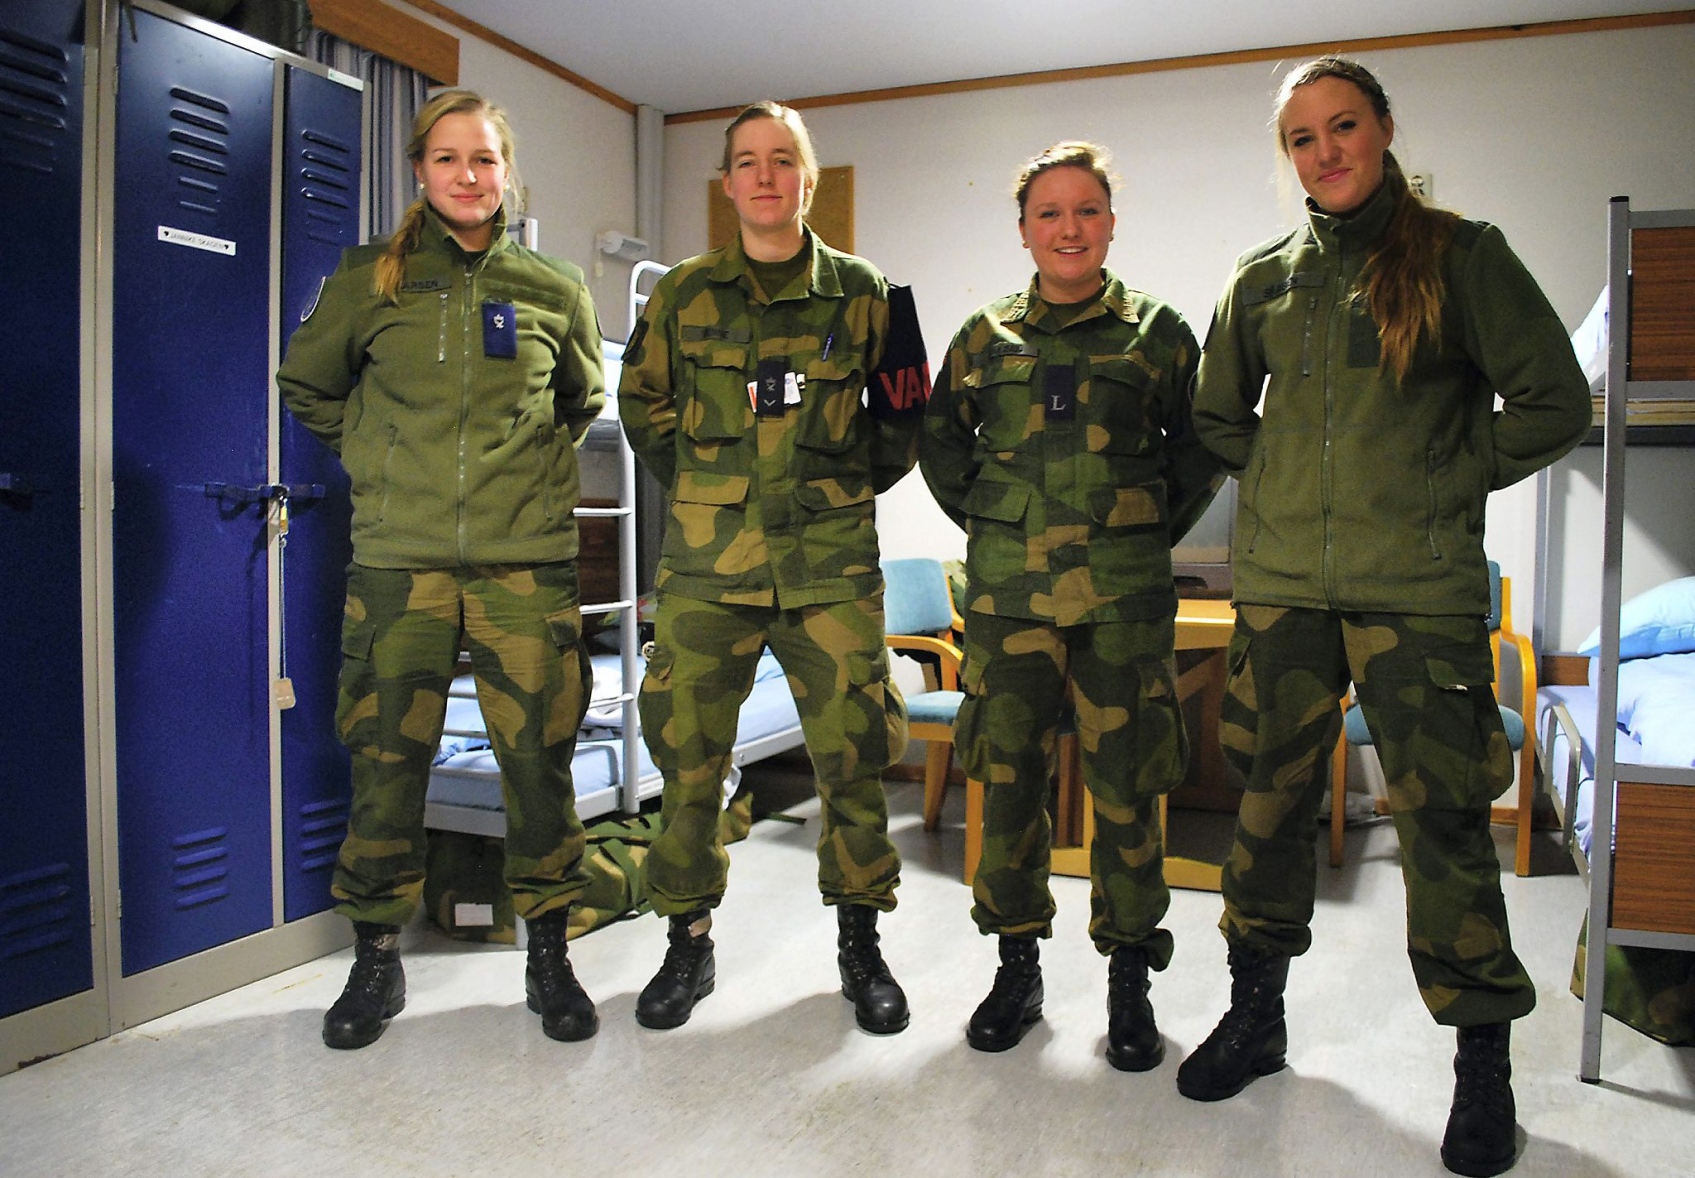 Inside the World's First All-Female Special Forces Unit: Norway's  Jegertroppen